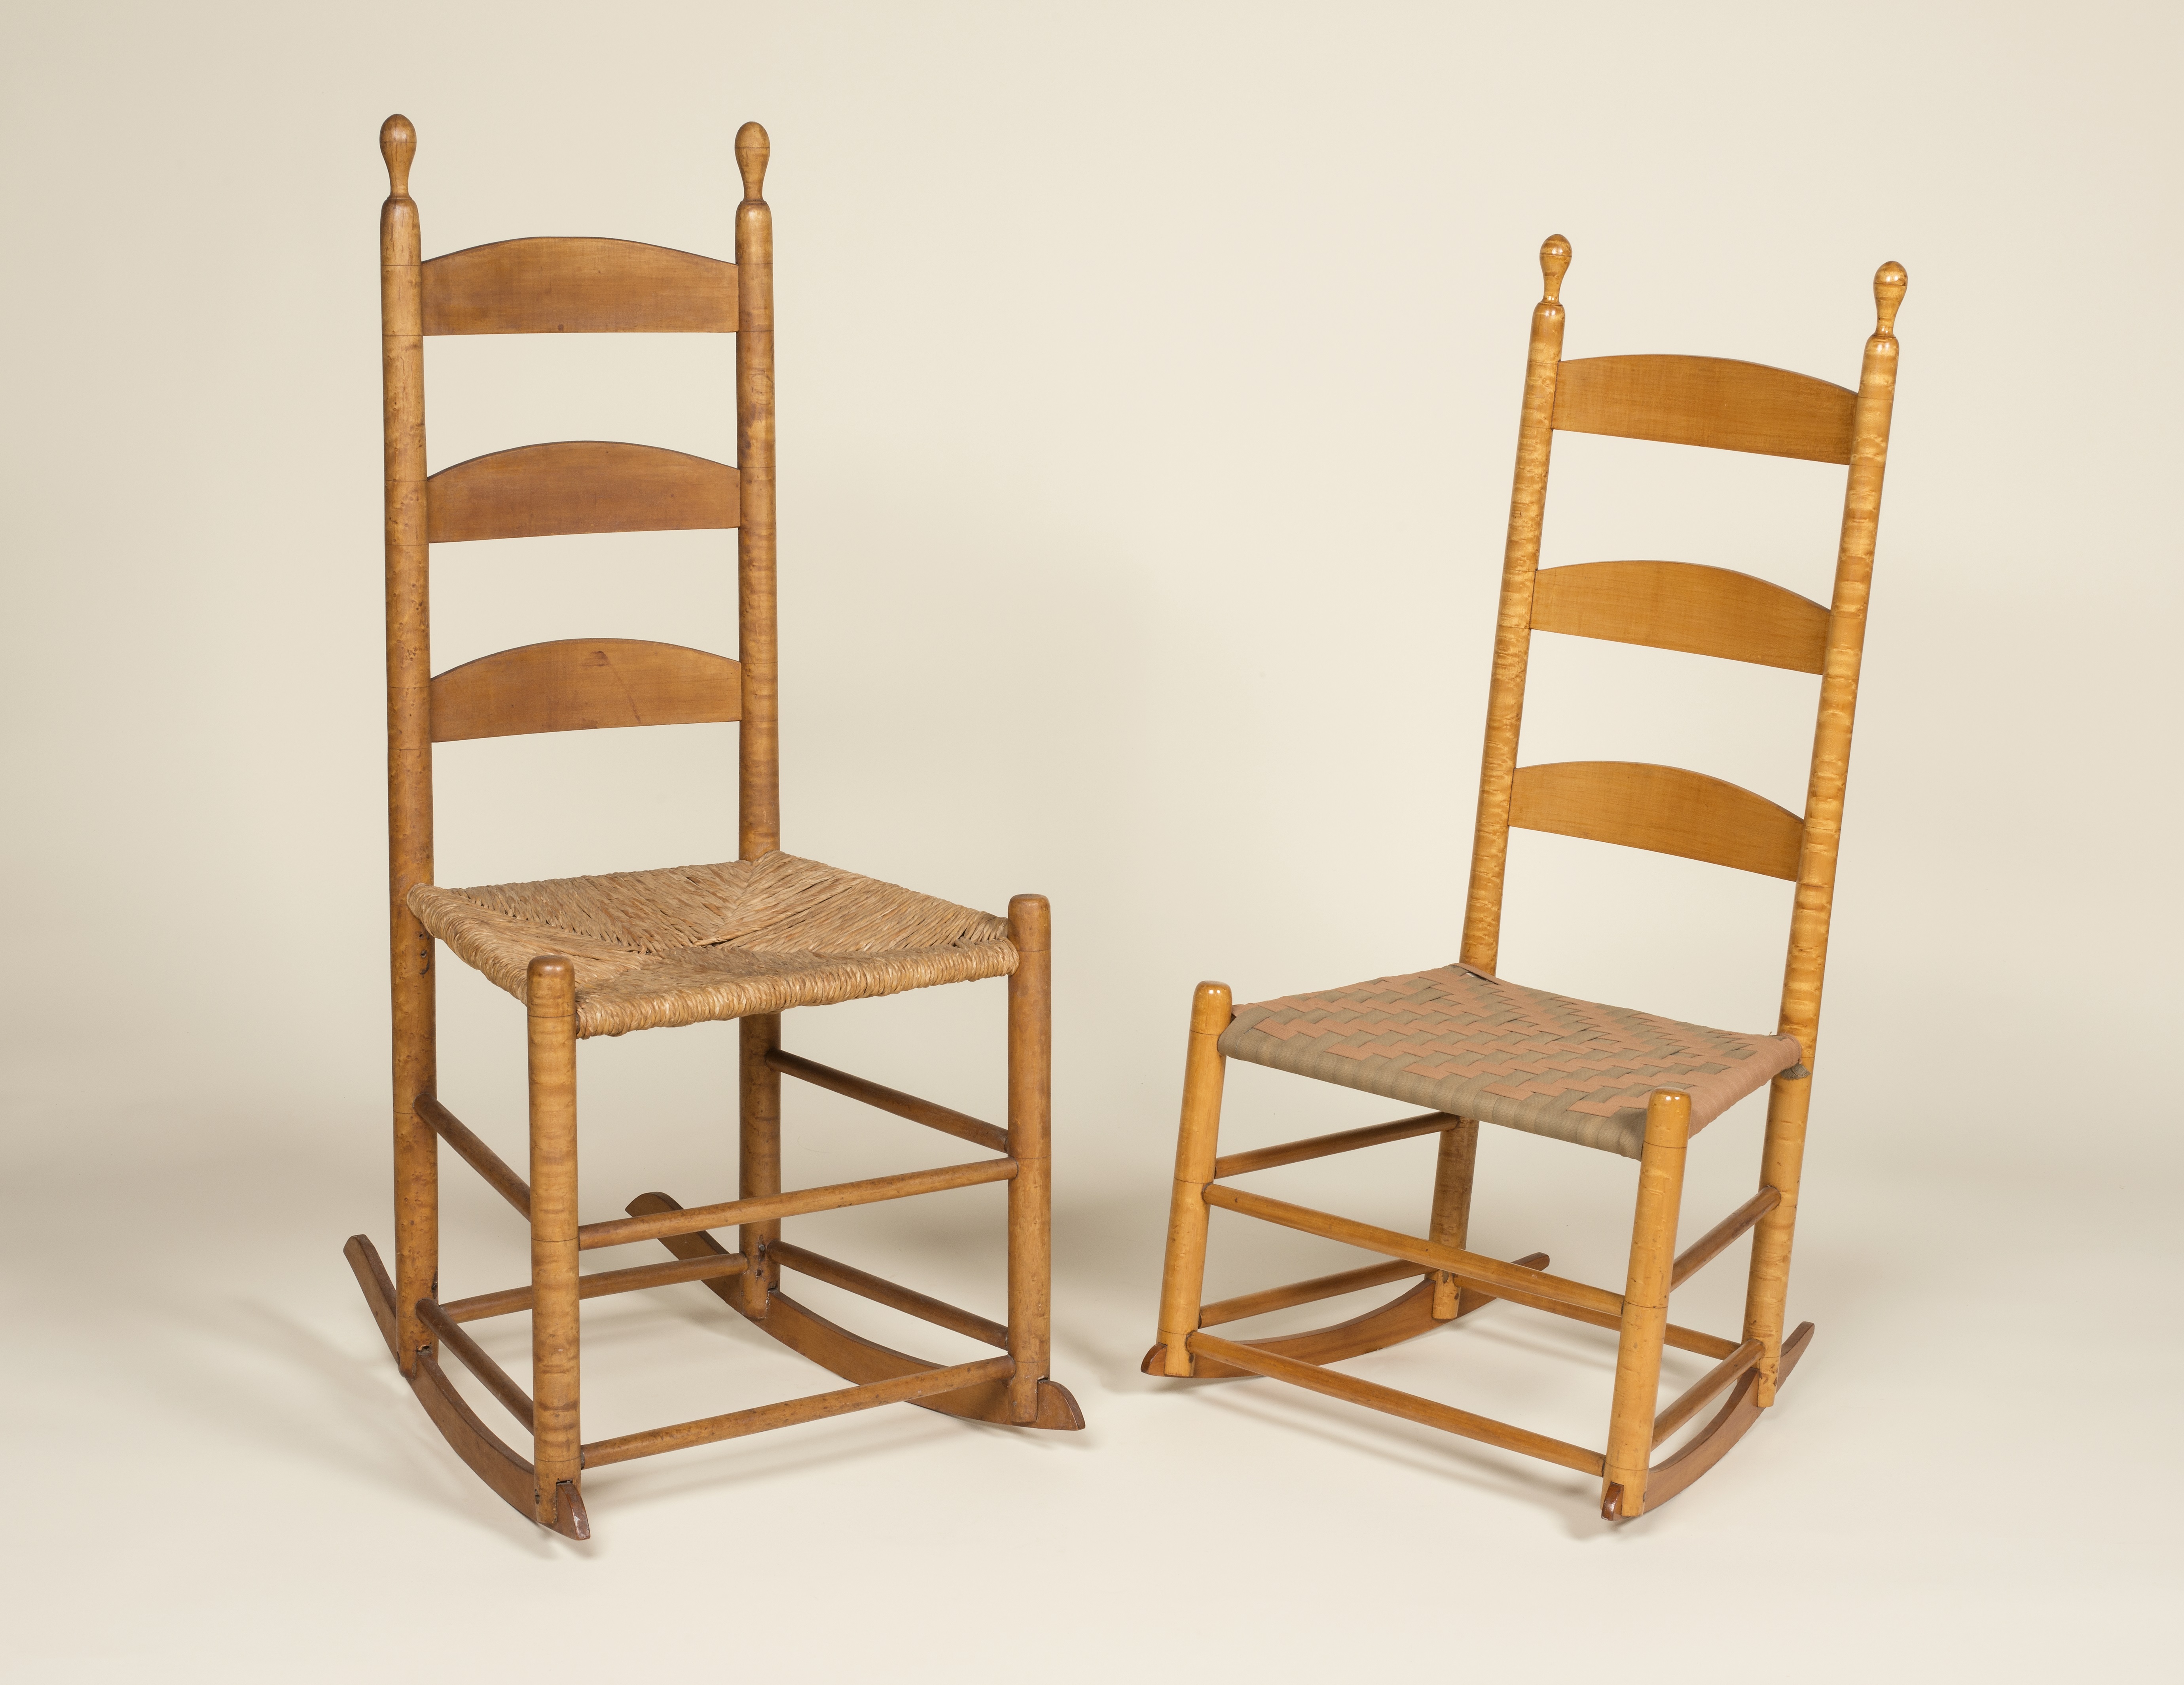 A pair of rocking chairs on a white background.